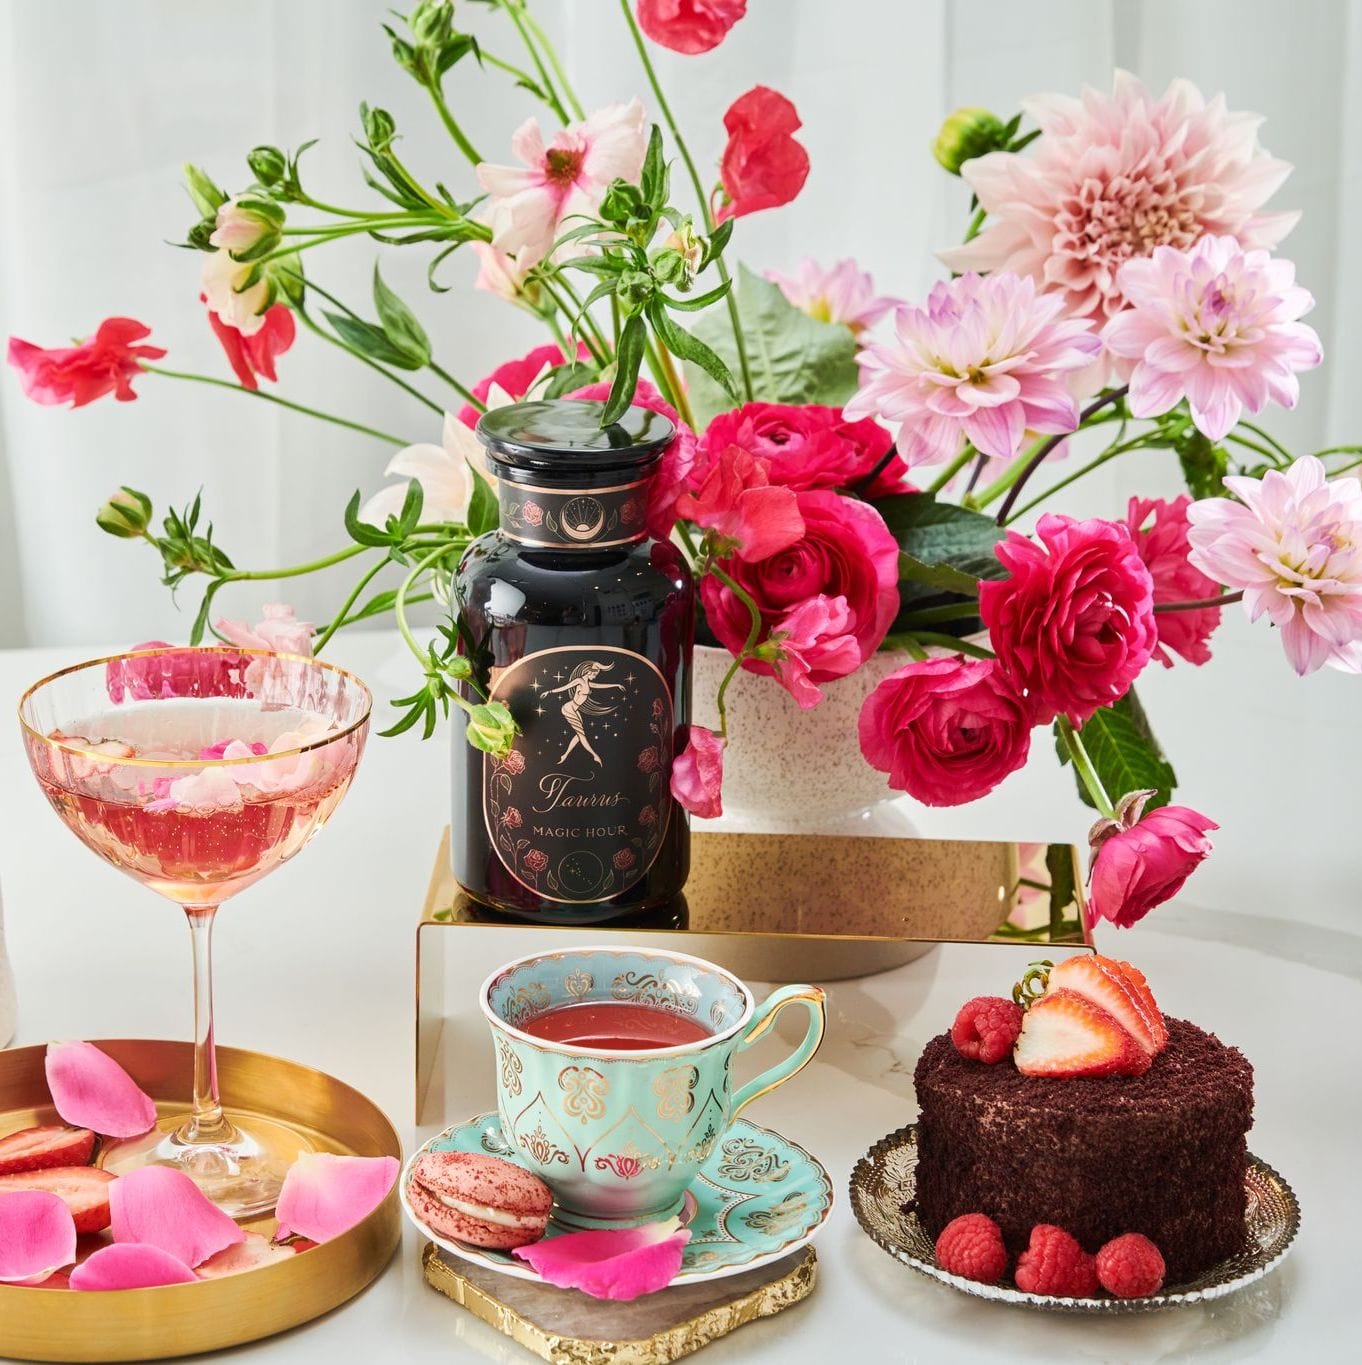 A beautifully arranged table featuring a bouquet of pink and red flowers, a glass of pink beverage with rose petals, a turquoise teacup filled with Magic Hour Taurus: Tea of Venusian Garden Delights and its matching saucer, a pink macaron, a small chocolate cake garnished with strawberries and raspberries, and a bottle labeled &quot;Glamour Magic Rocks.